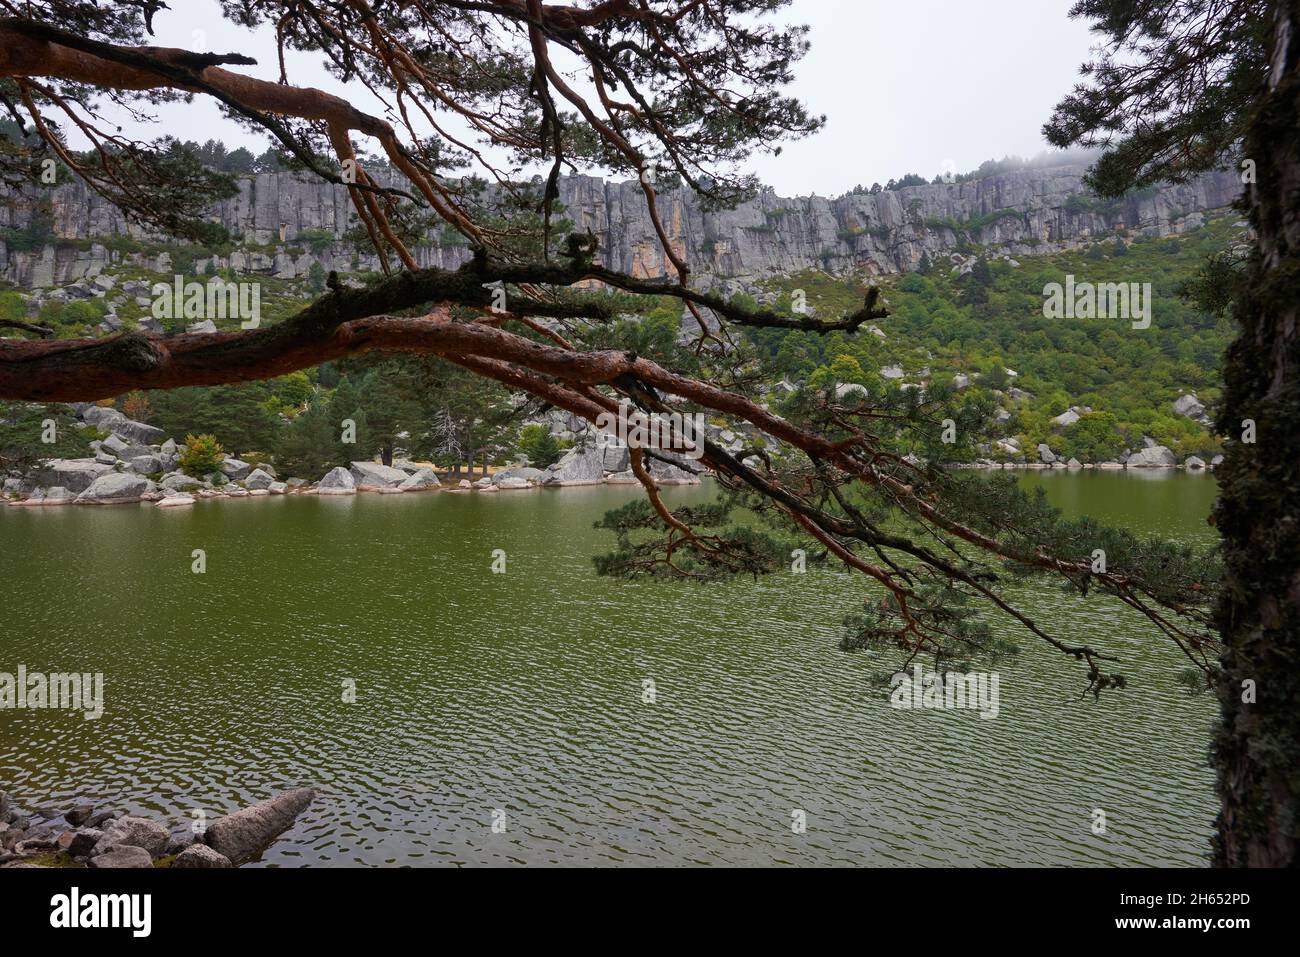 A nice view of a lake surrounded by a pine forest on a gray autumn day. Stock Photo